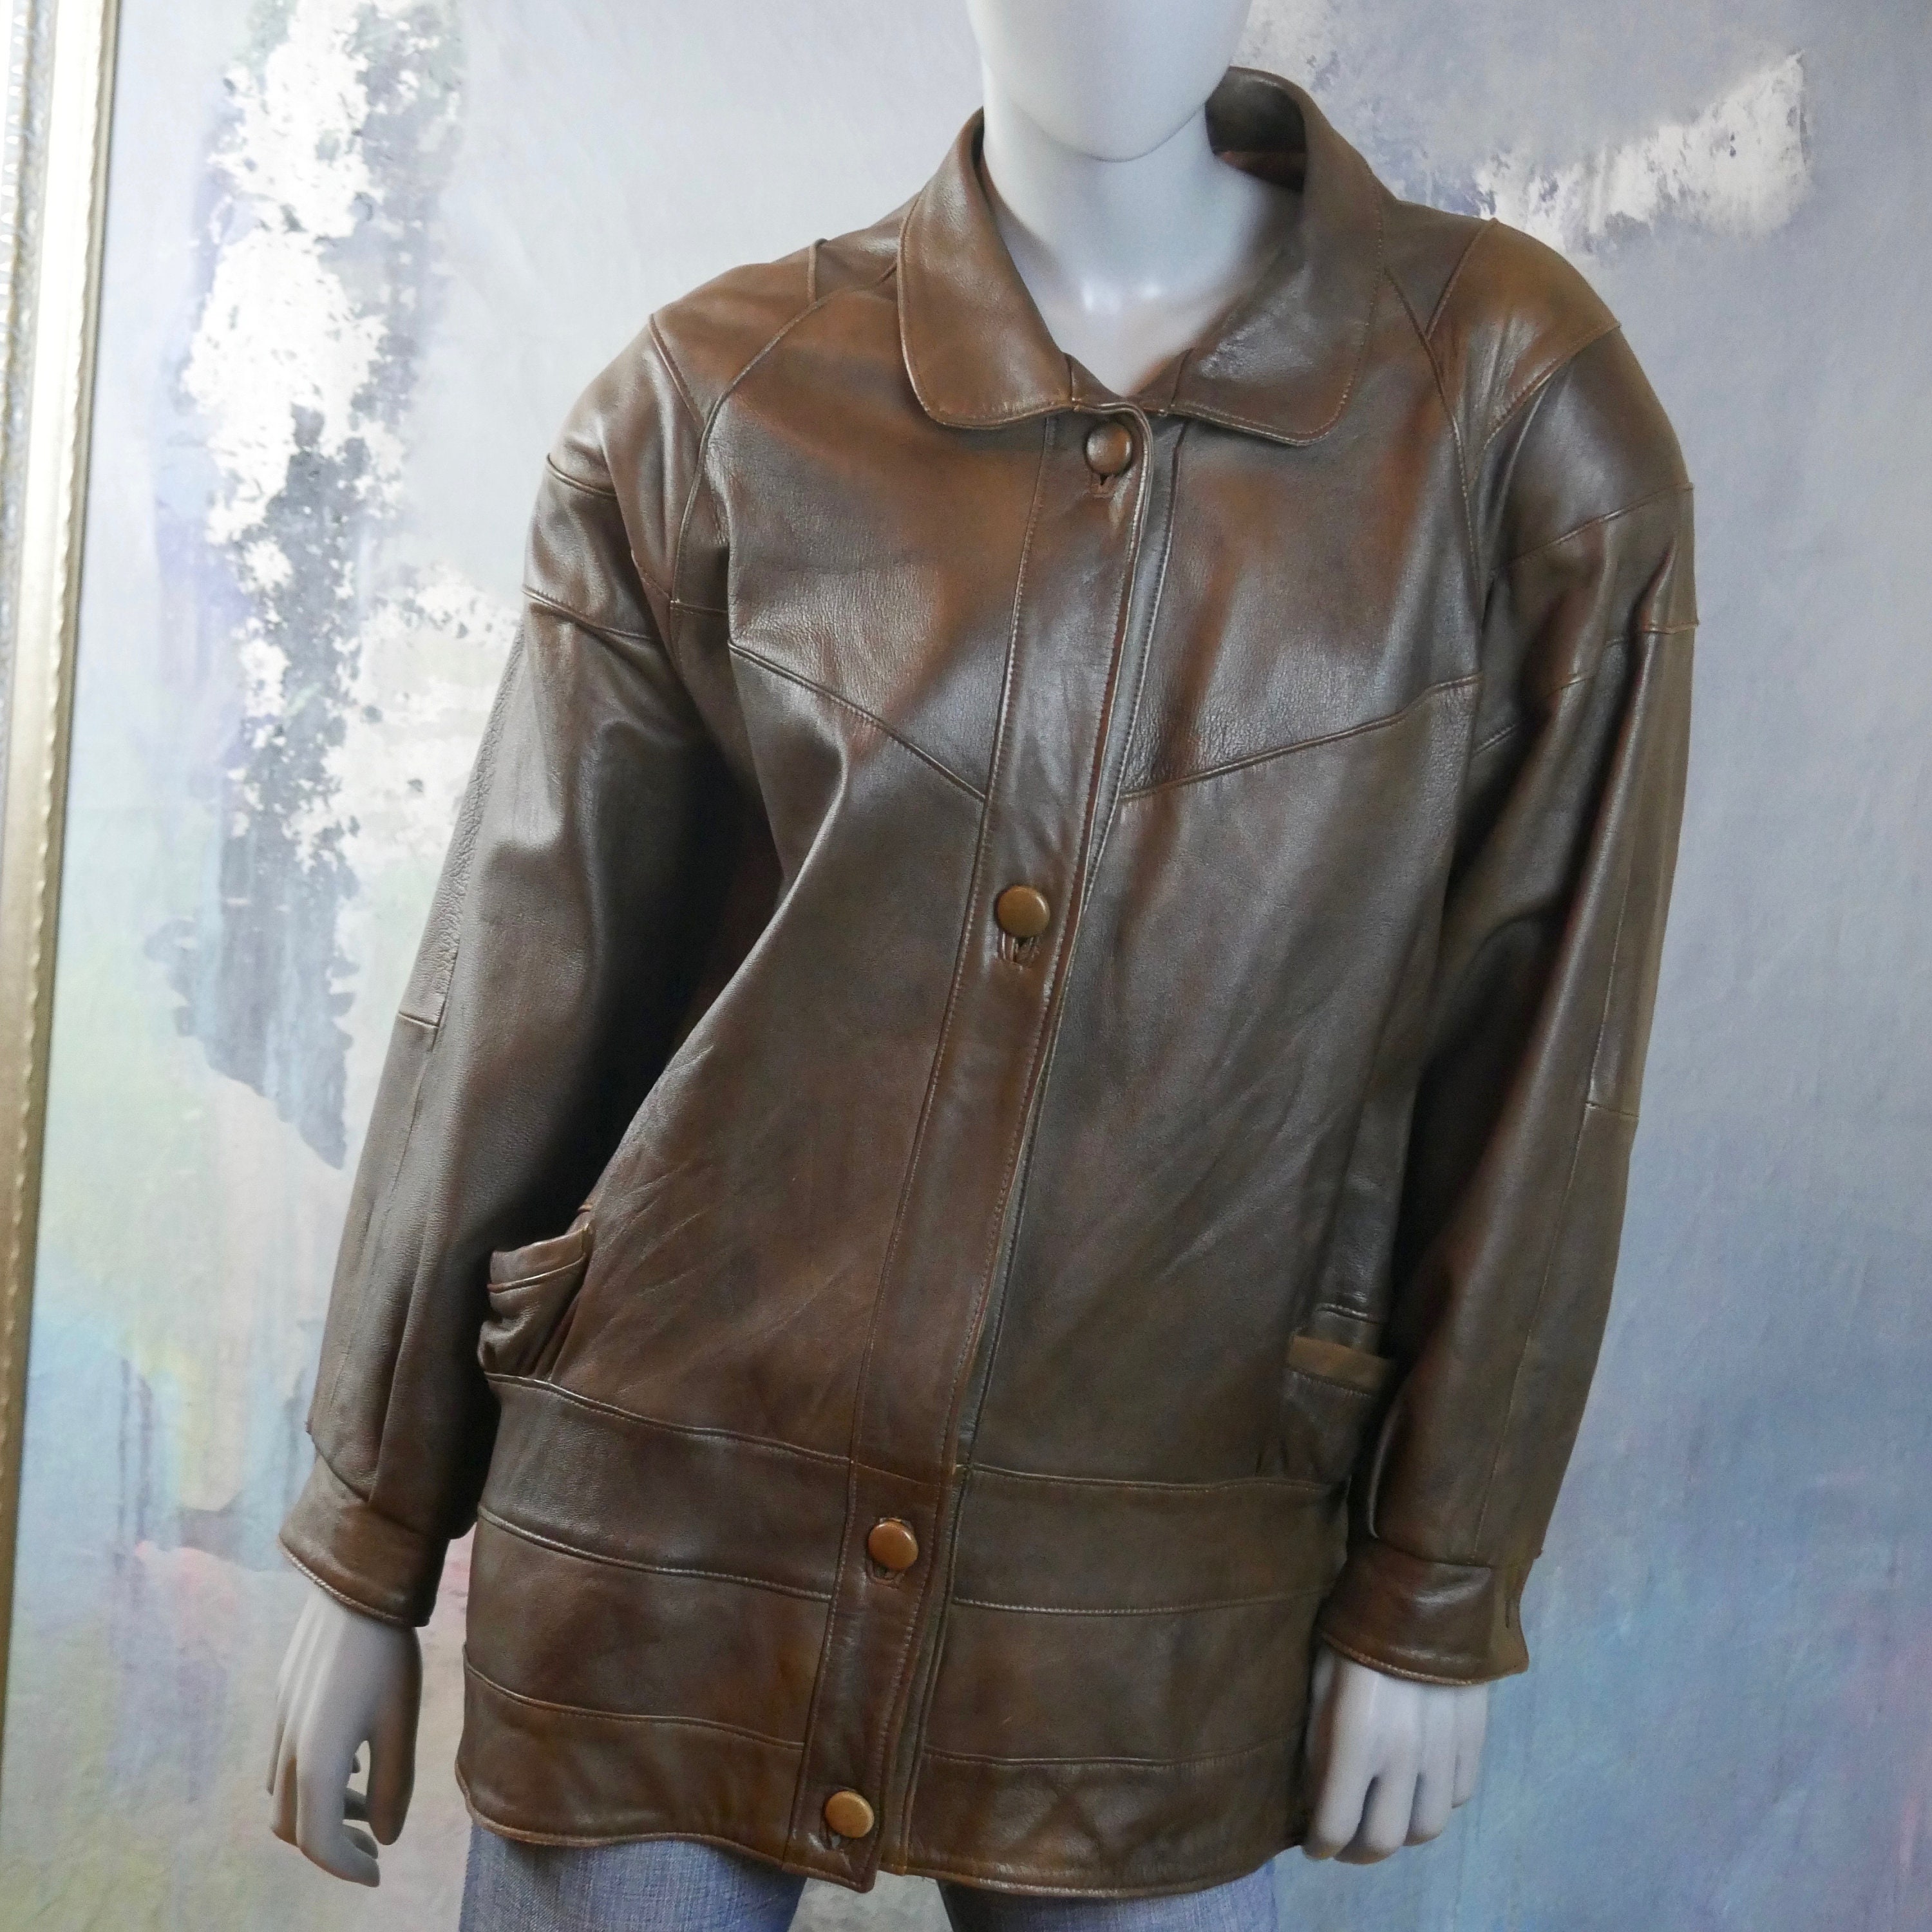 Soft 1980S Brown Leather Jacket, Women's European Vintage, Made in Cyprus Size 12 Us, 16 Uk